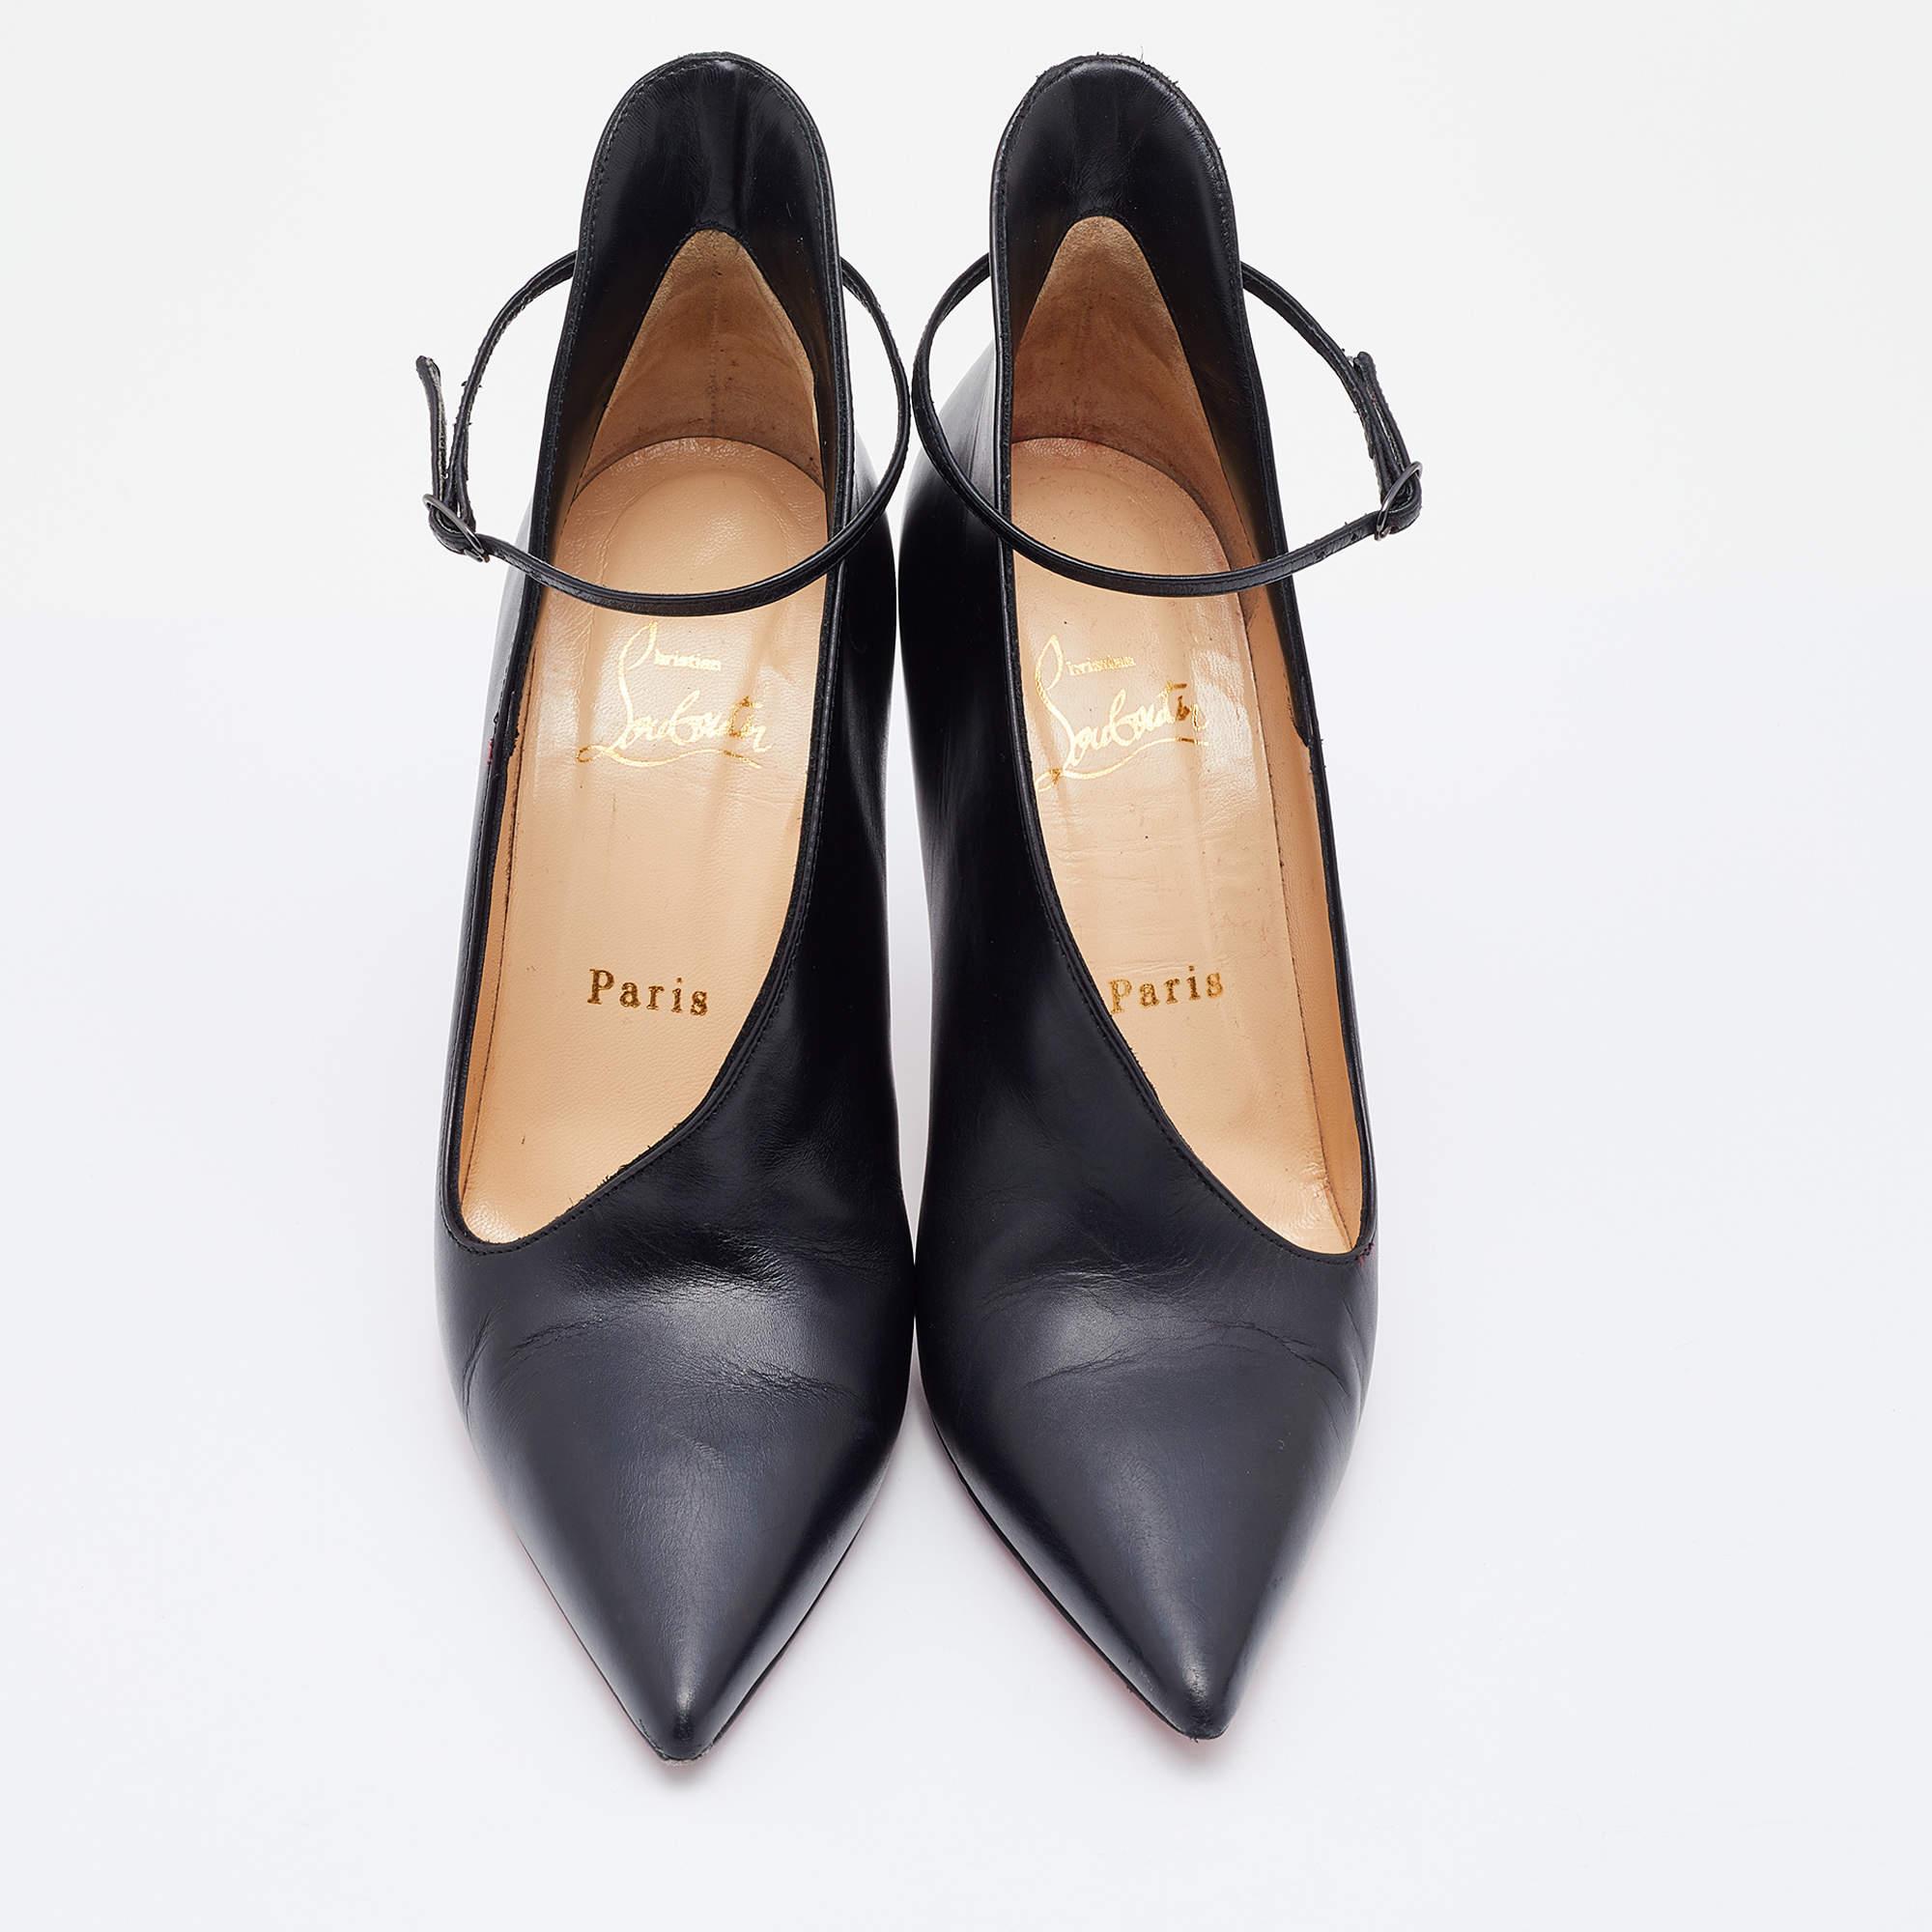 Make a chic style statement with these designer pumps. They showcase sturdy heels and durable soles, perfect for your fashionable outings!

Includes: Extra Heel Tips, Original Pouch, Invoice, Original Dustbag, Original Box

